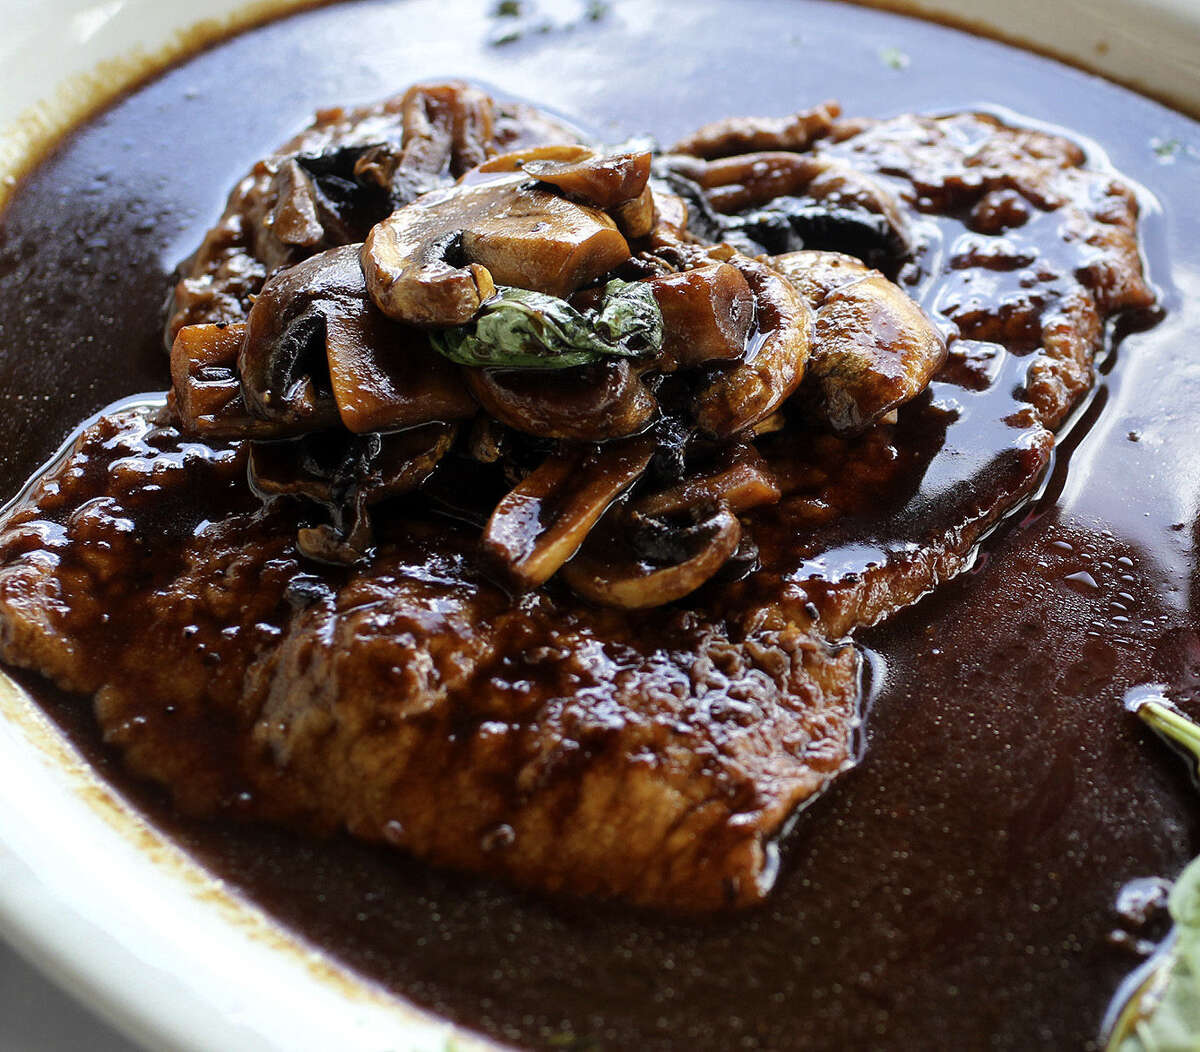 Sorrento Ristorante e Pizzeria offers a classic, flavorful veal marsala that is easy to make at home.